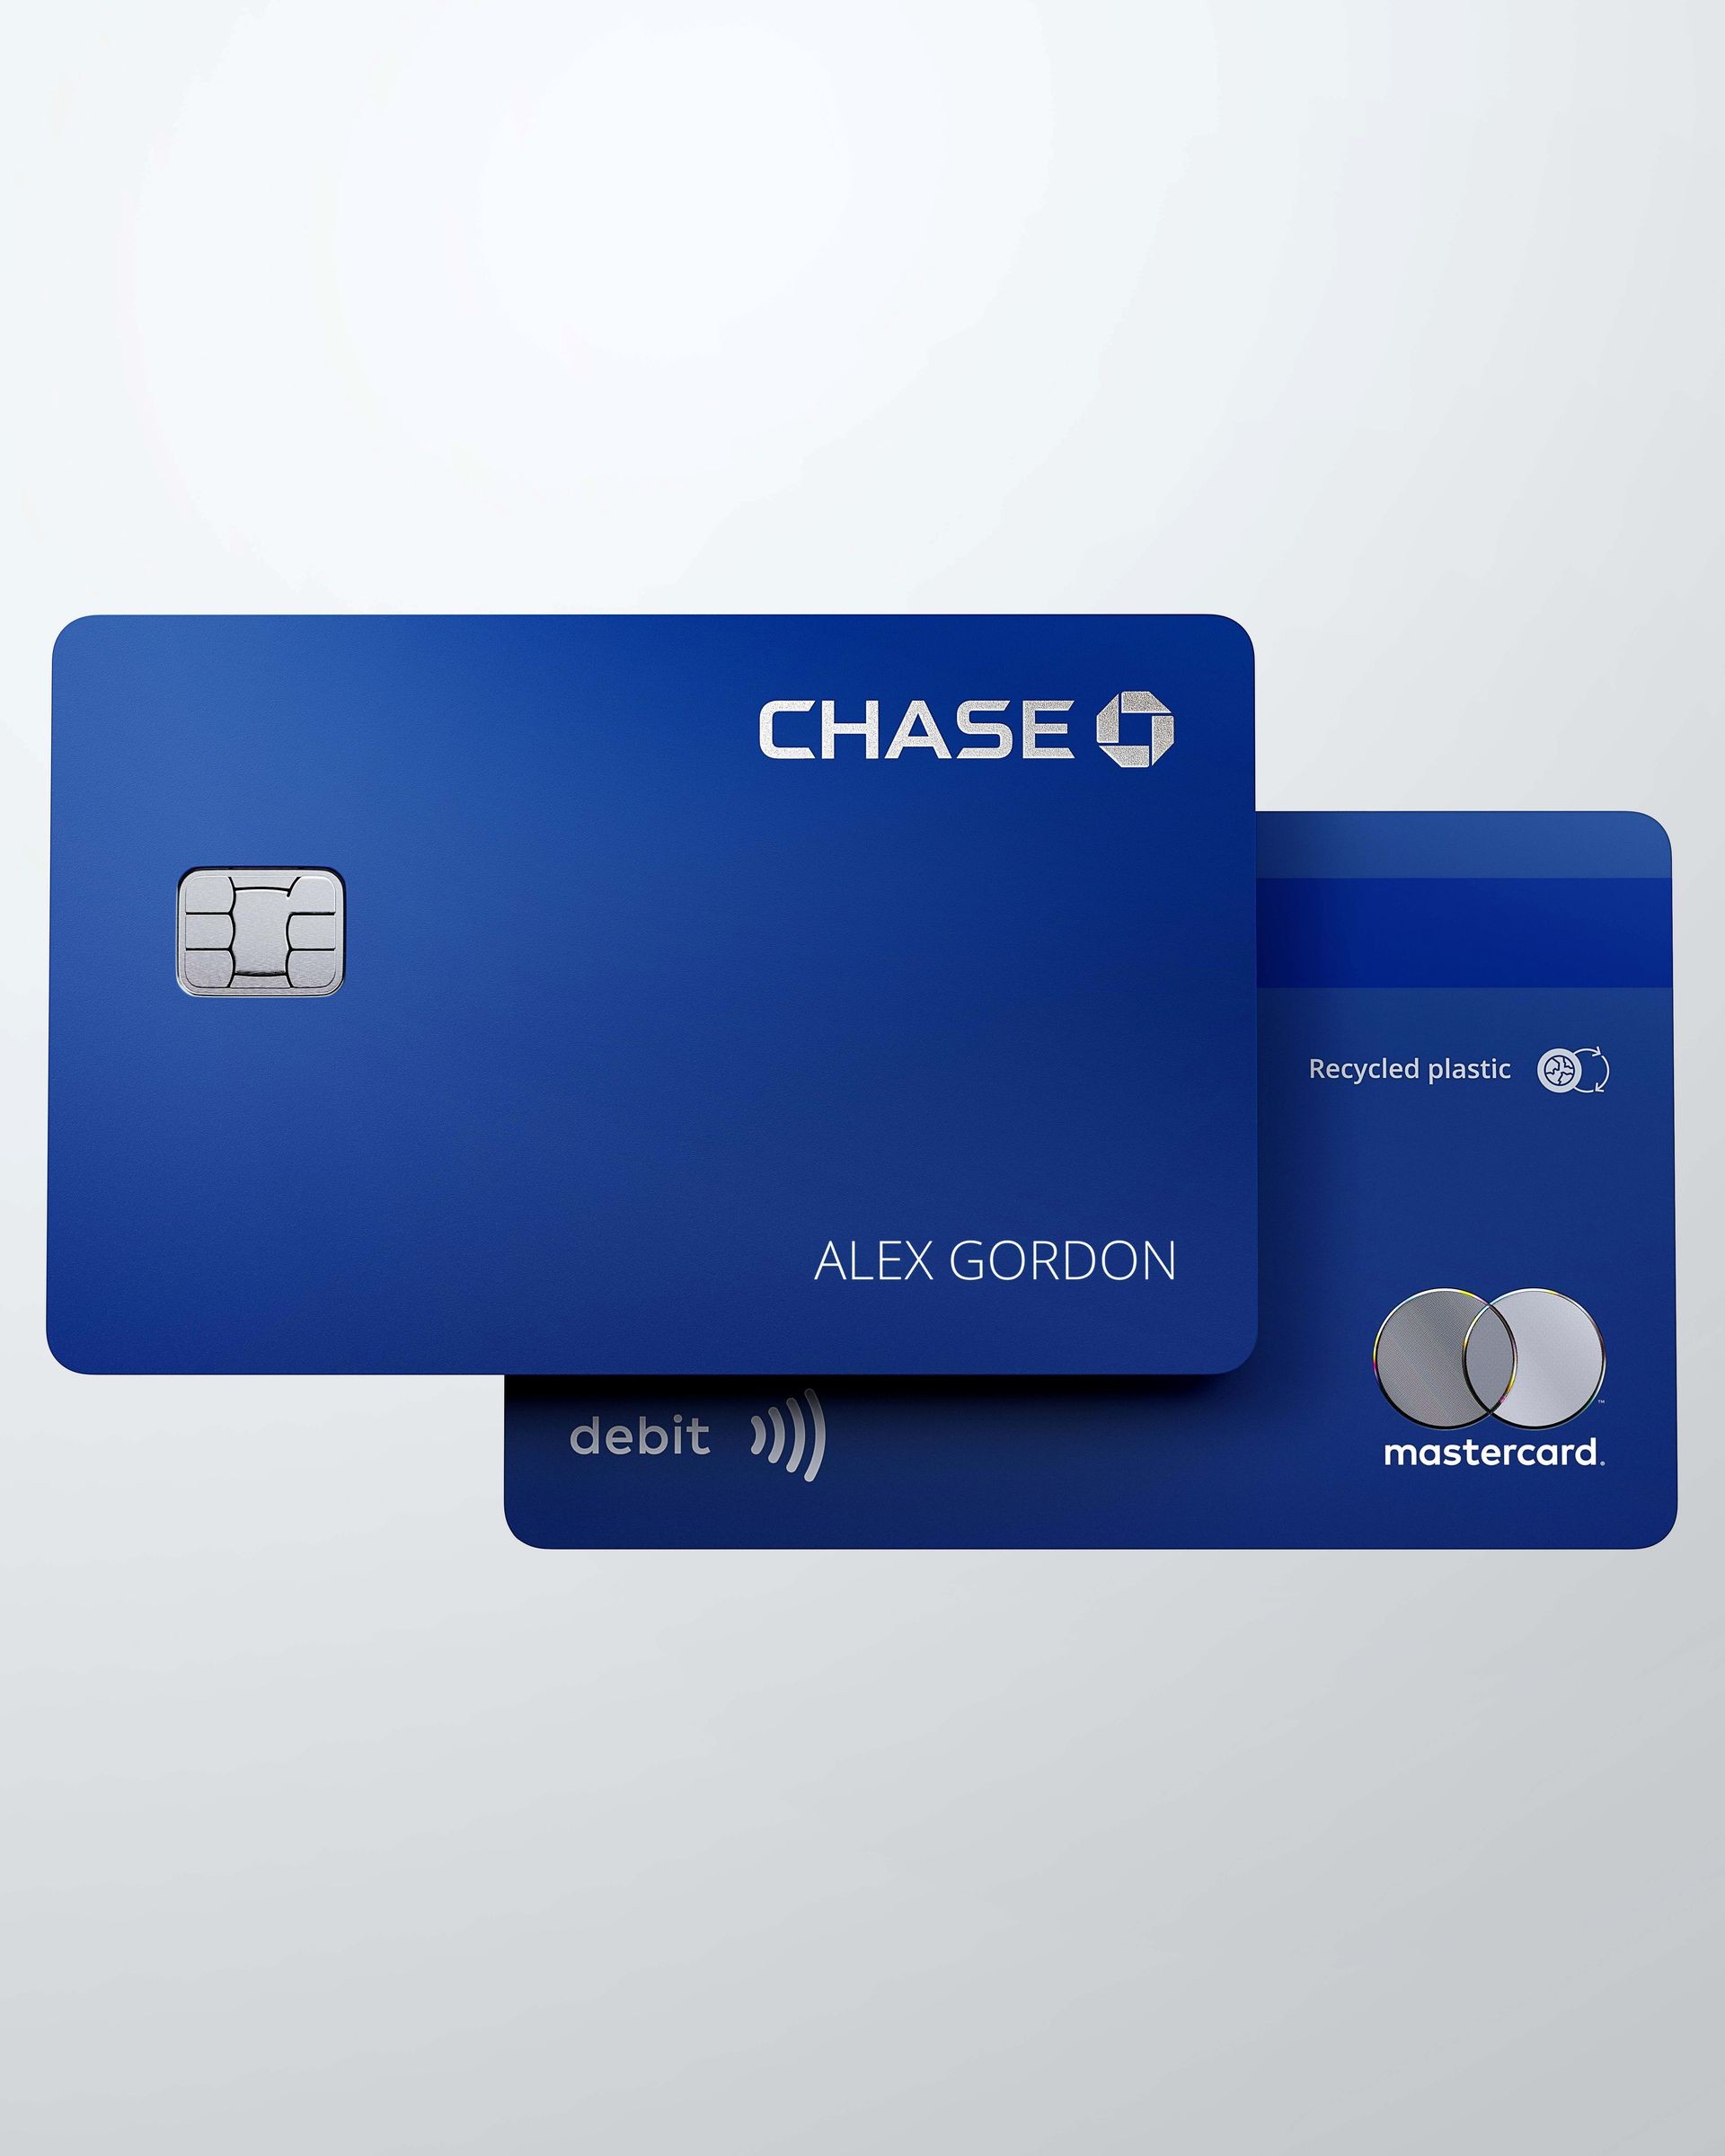 SWOT Analysis of Chase - Chase Credit Card